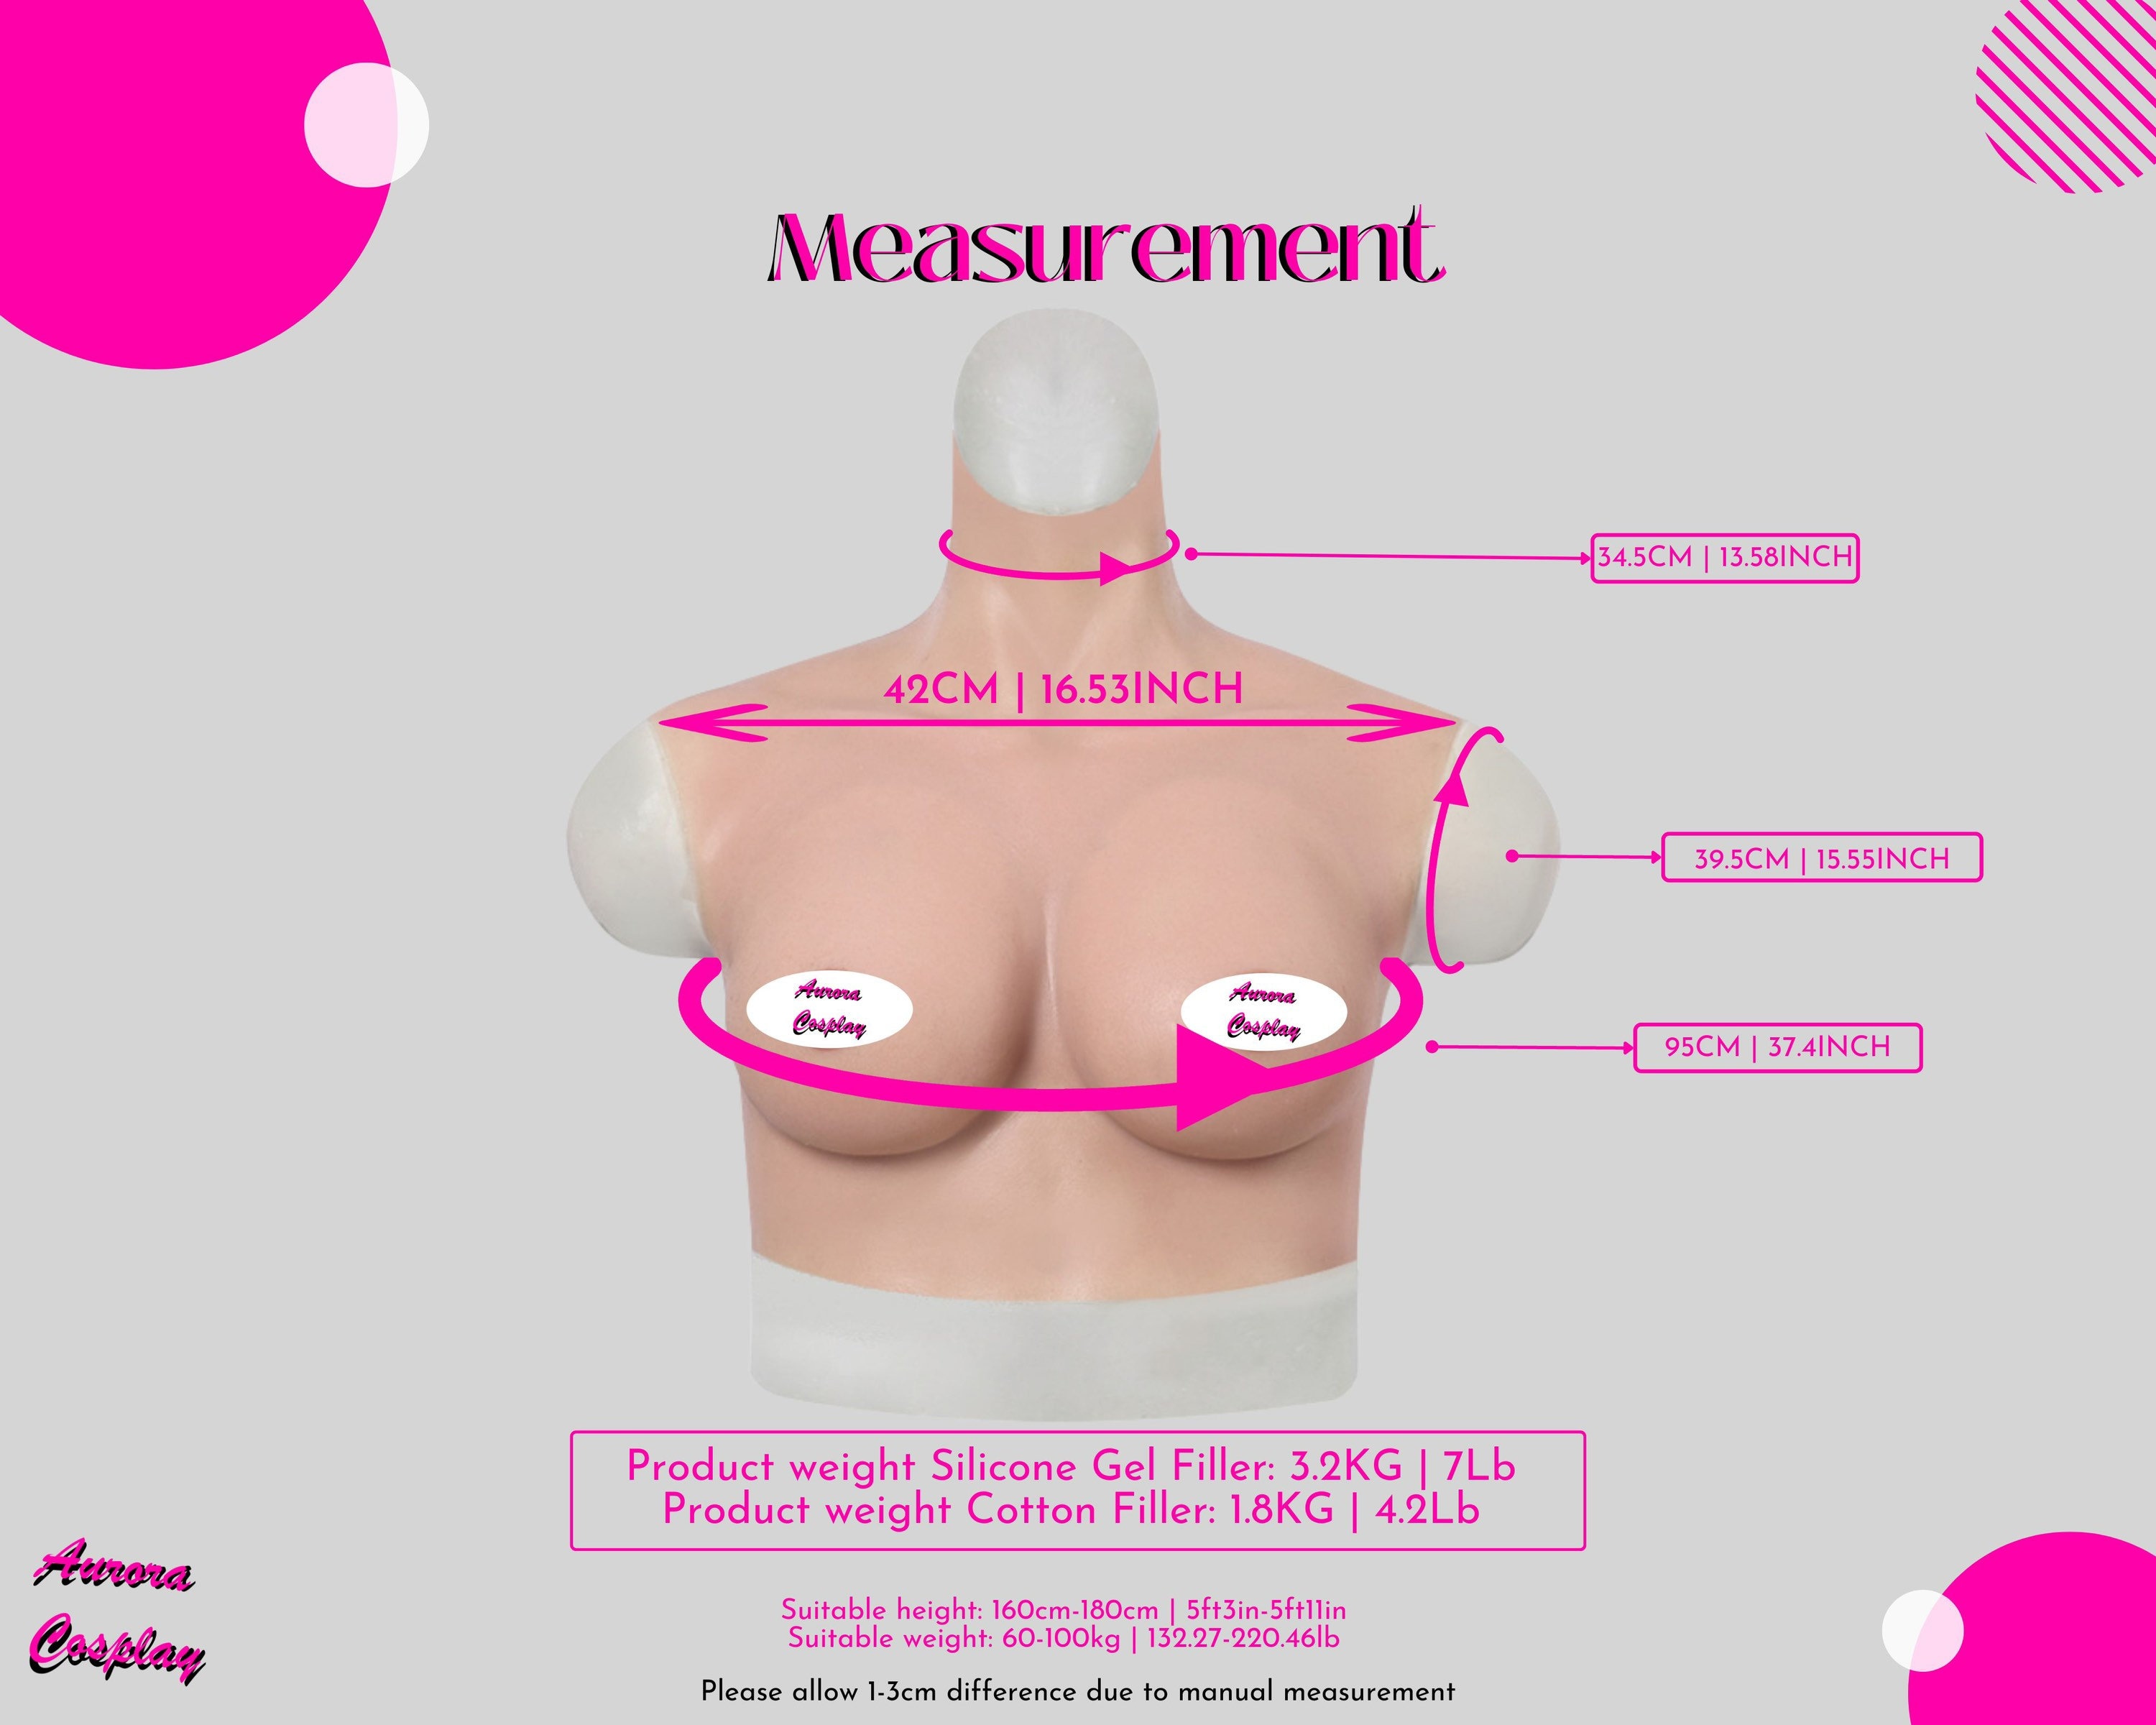 c cup size breast - Buy c cup size breast at Best Price in